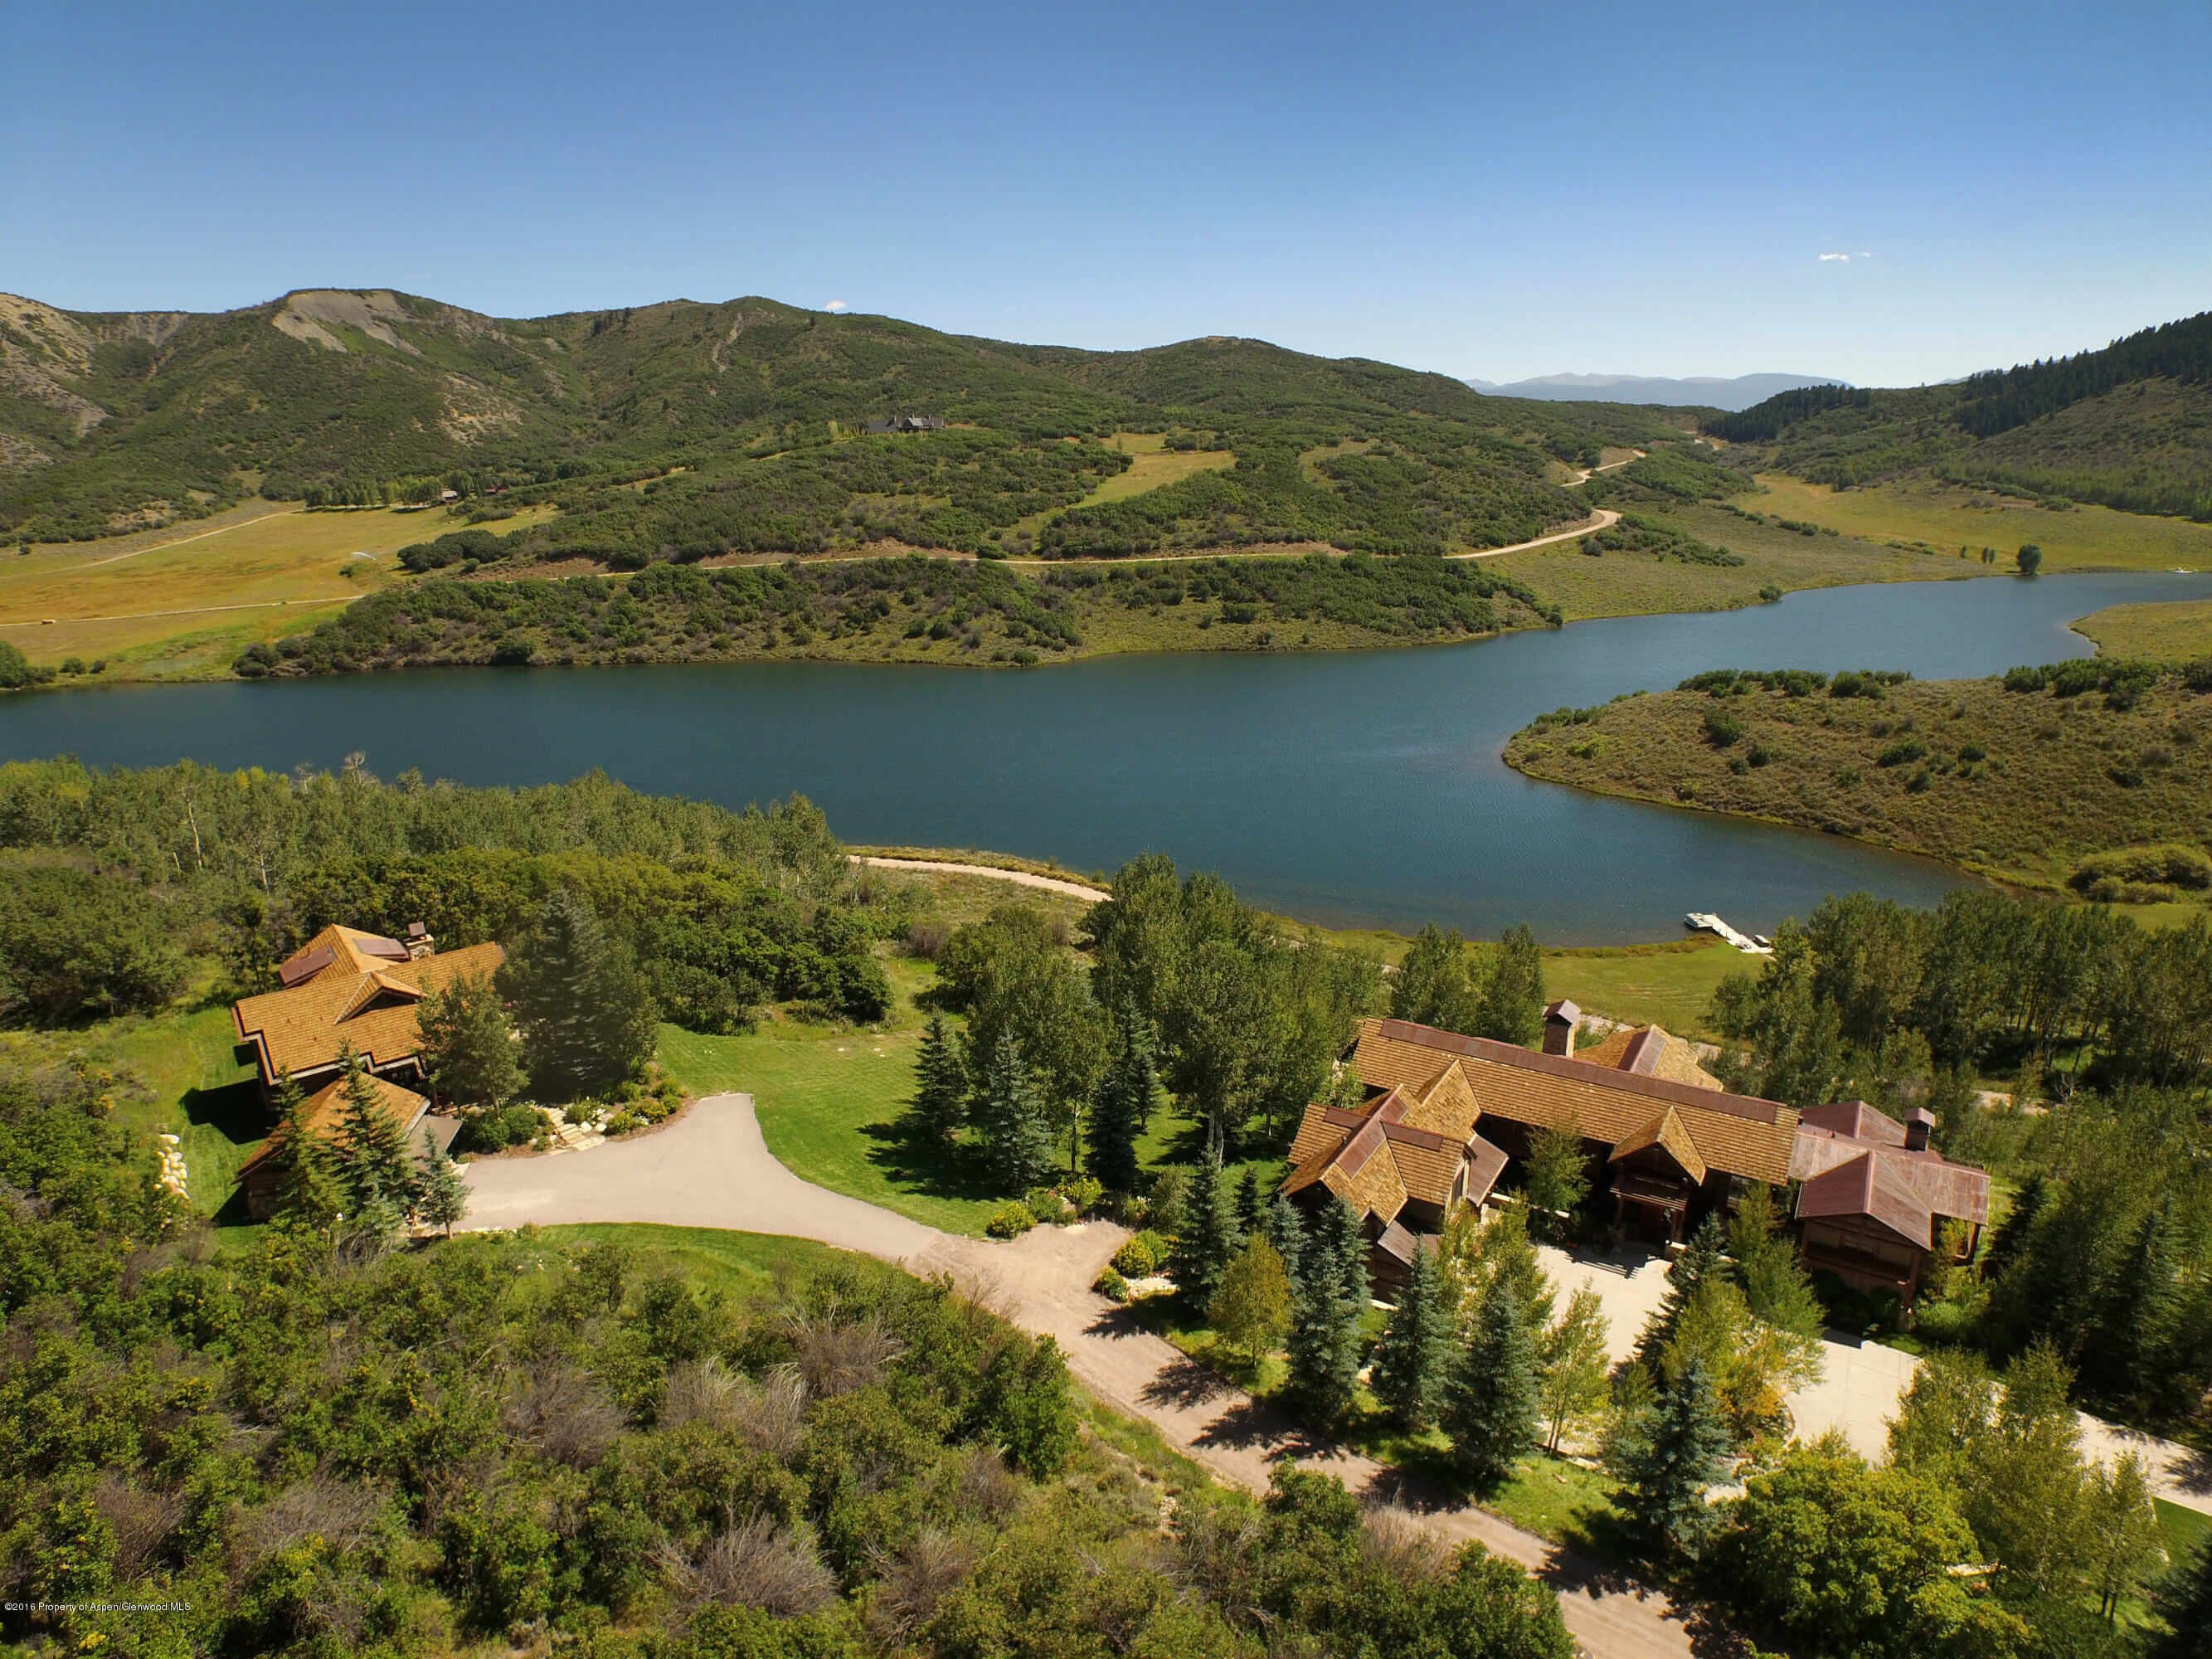 Wildcat Ranch: 2002 Built 13,000 Sq Ft Home on 500 Acres Closes at $9M/$688 Sq Ft Image